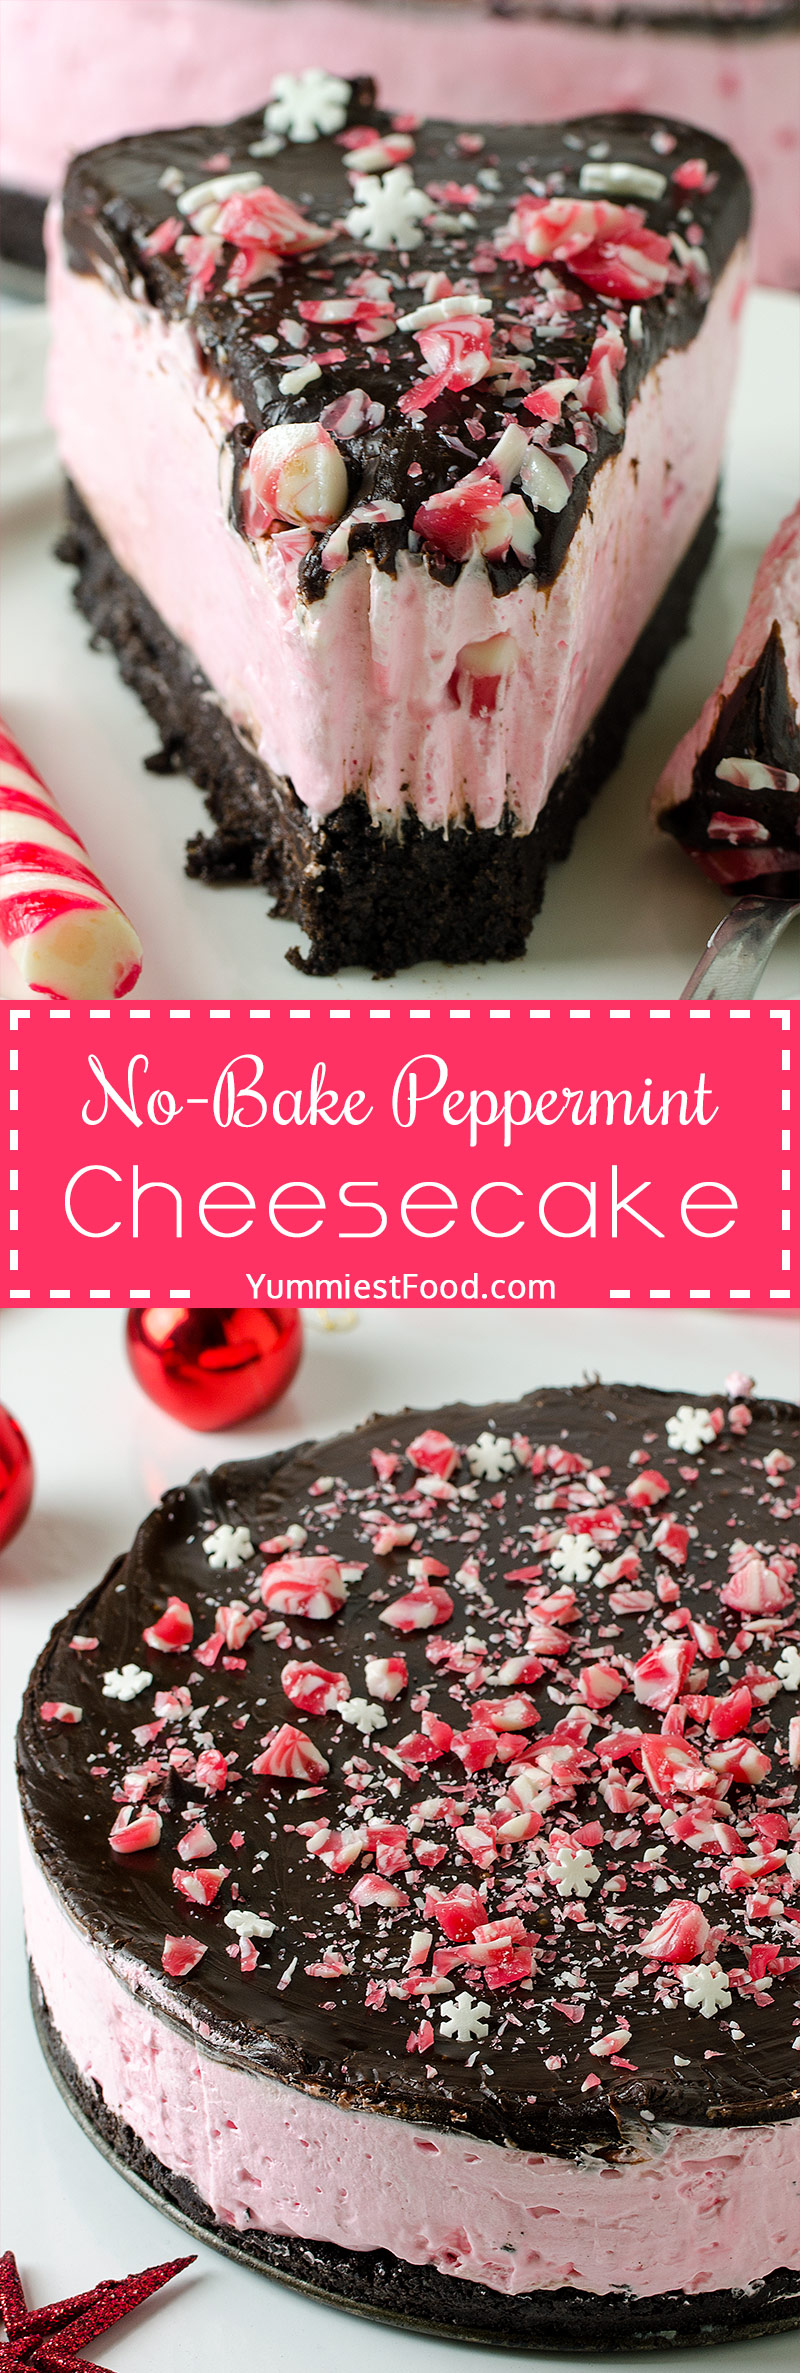 NO-BAKE PEPPERMINT CHEESECAKE - Perfect and easy No-Bake Peppermint Cheesecake is the best way to enjoy the delicious holiday flavors in a stunning dessert recipe